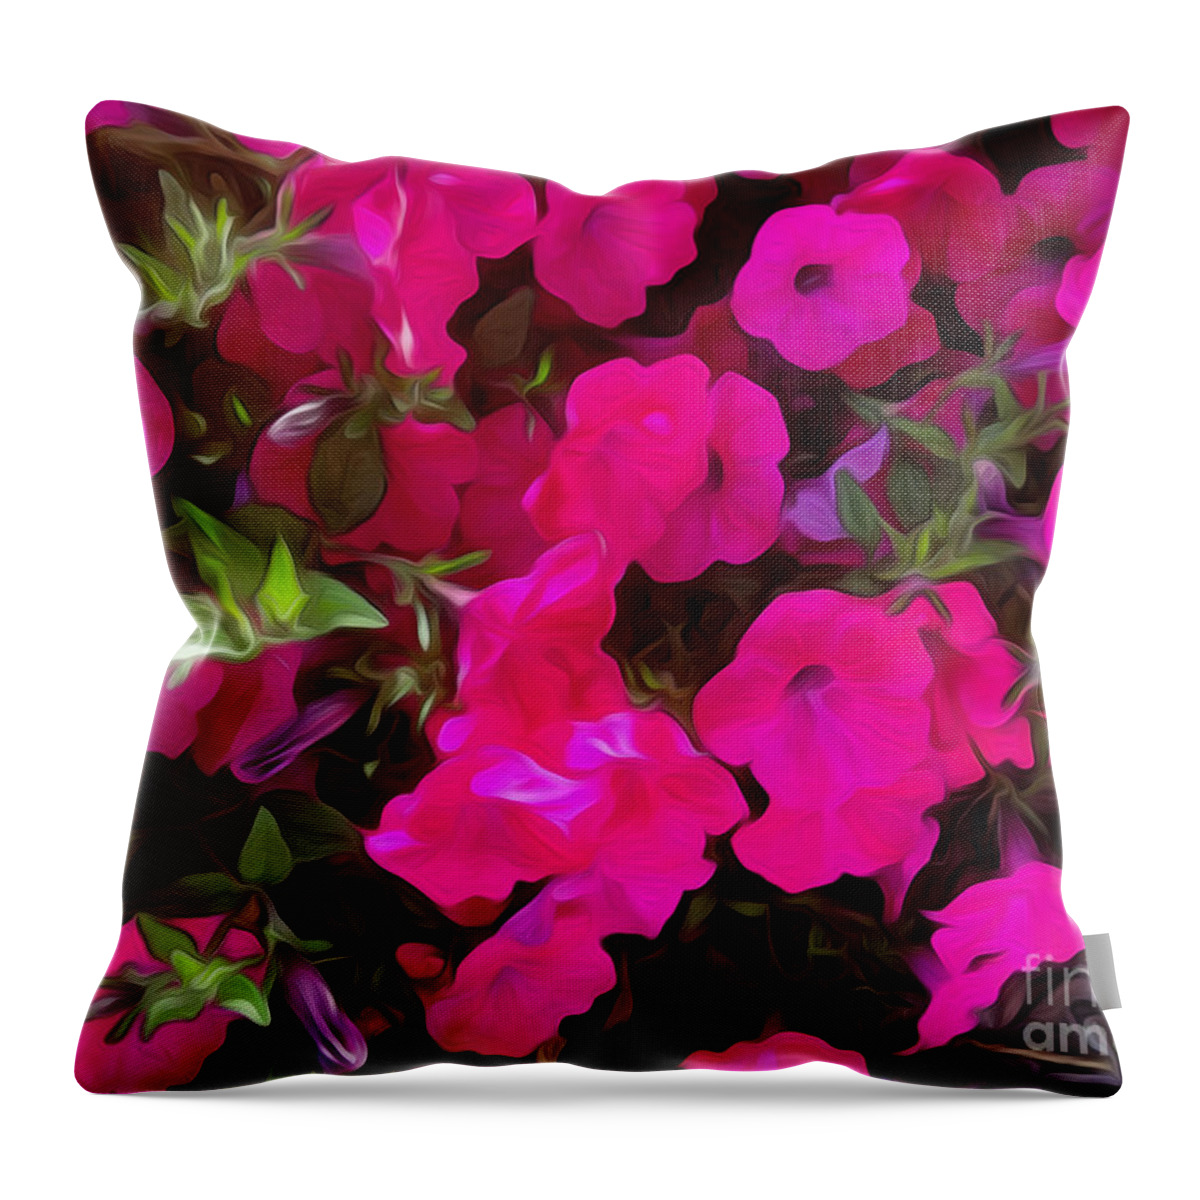 Flowers Throw Pillow featuring the painting Pretty Petunias by Sarabjit Singh